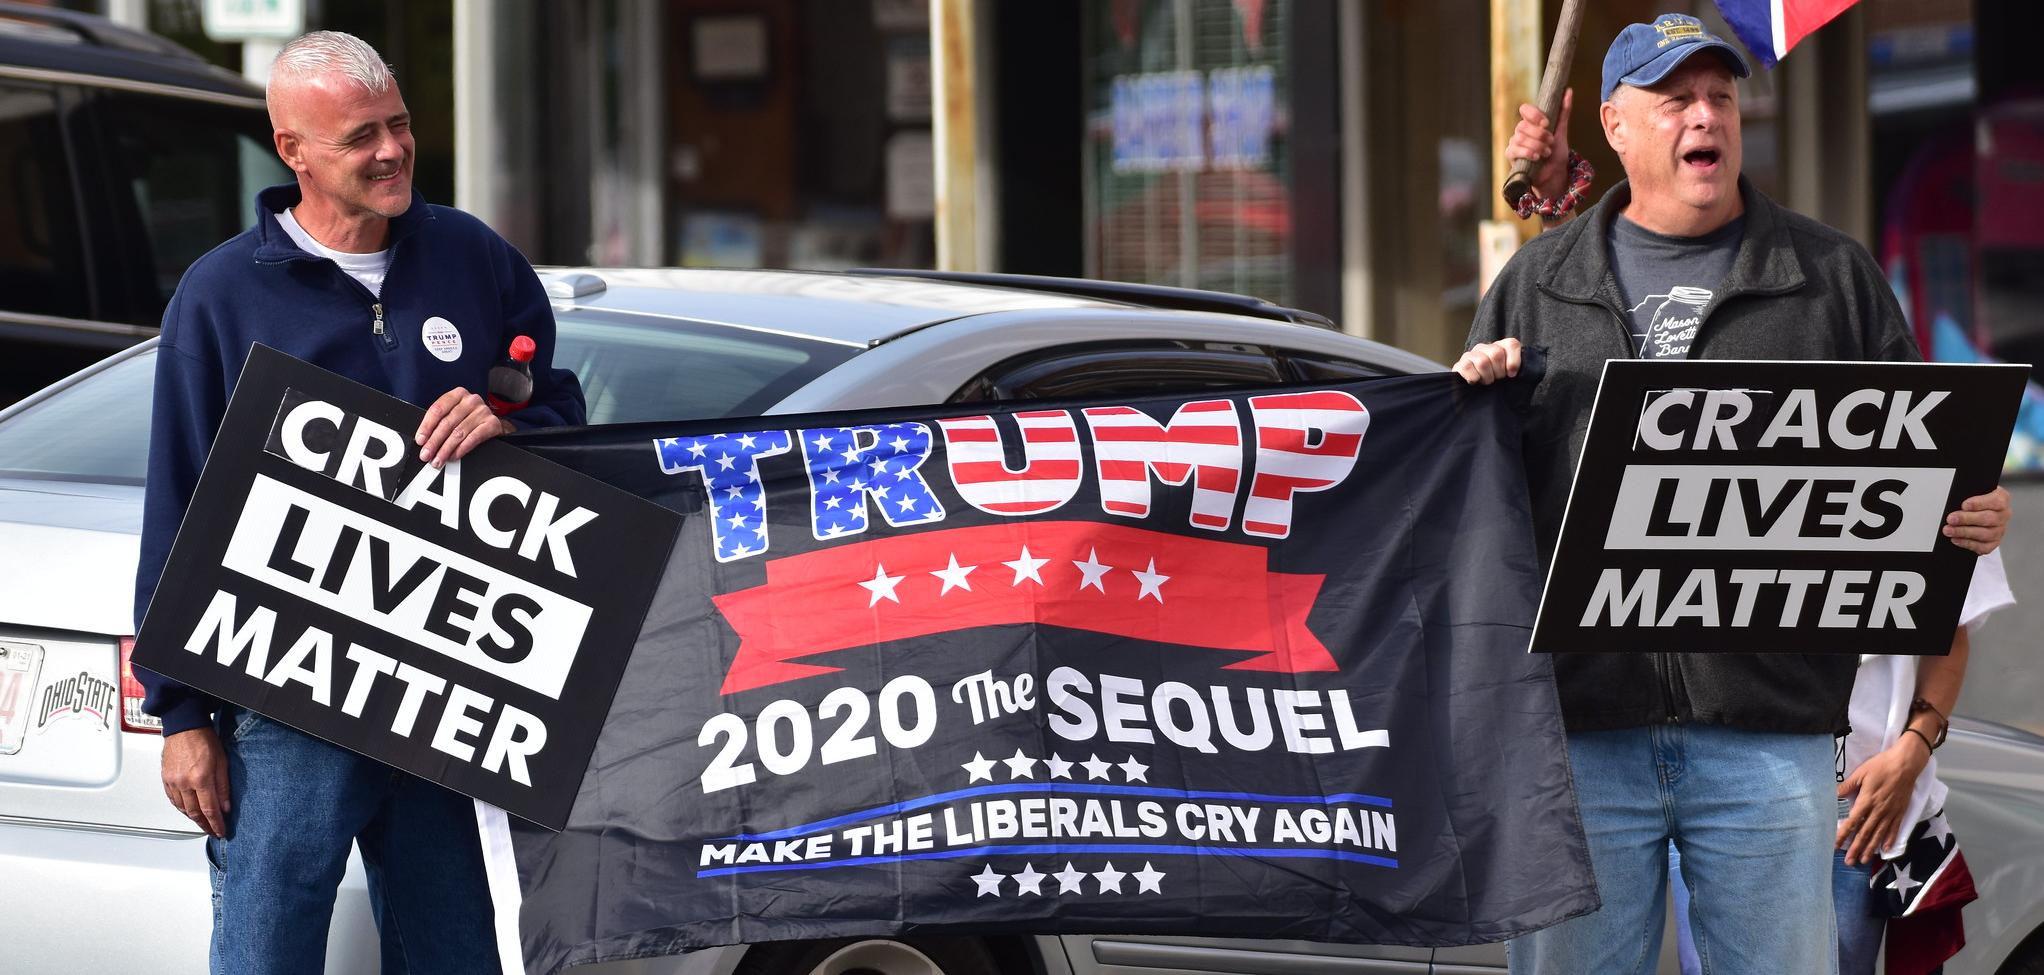 Two men holding a flag that says Trump 2020 The Sequel and banners saying "crack lives matter"